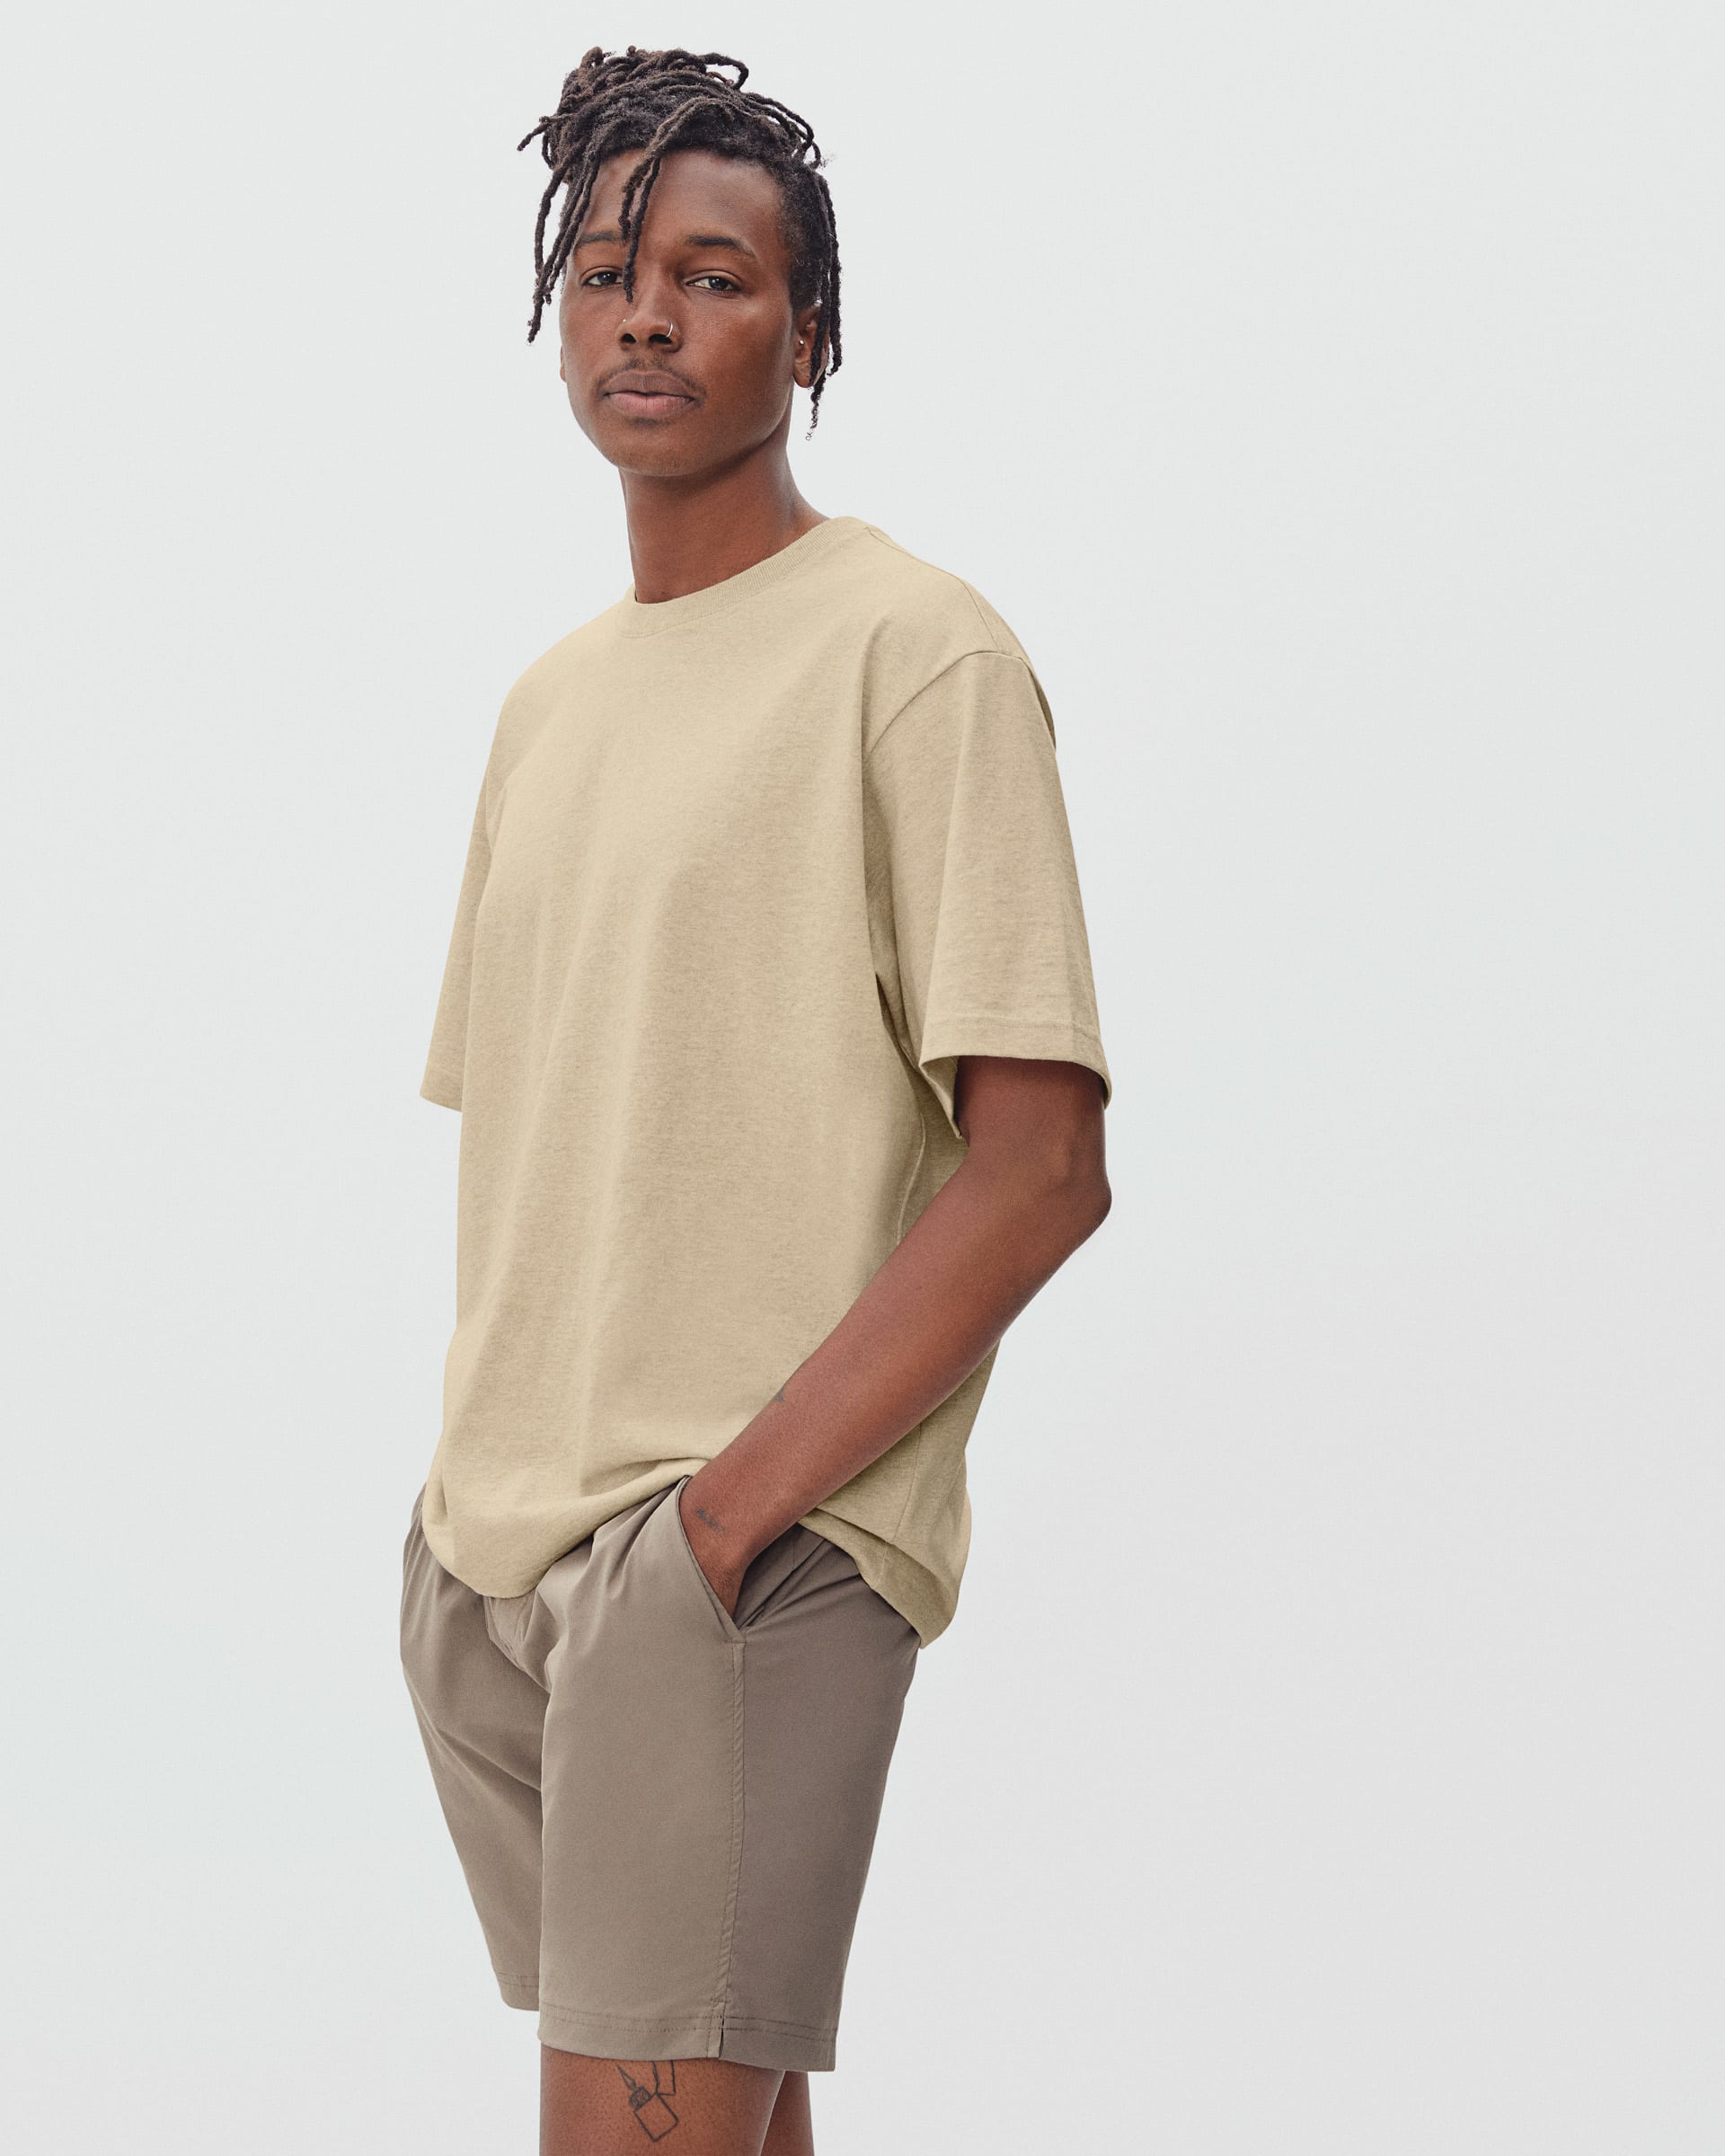 Mens Premium-Weight Relaxed Crew | Uniform T-Shirt by Everlane Product Image